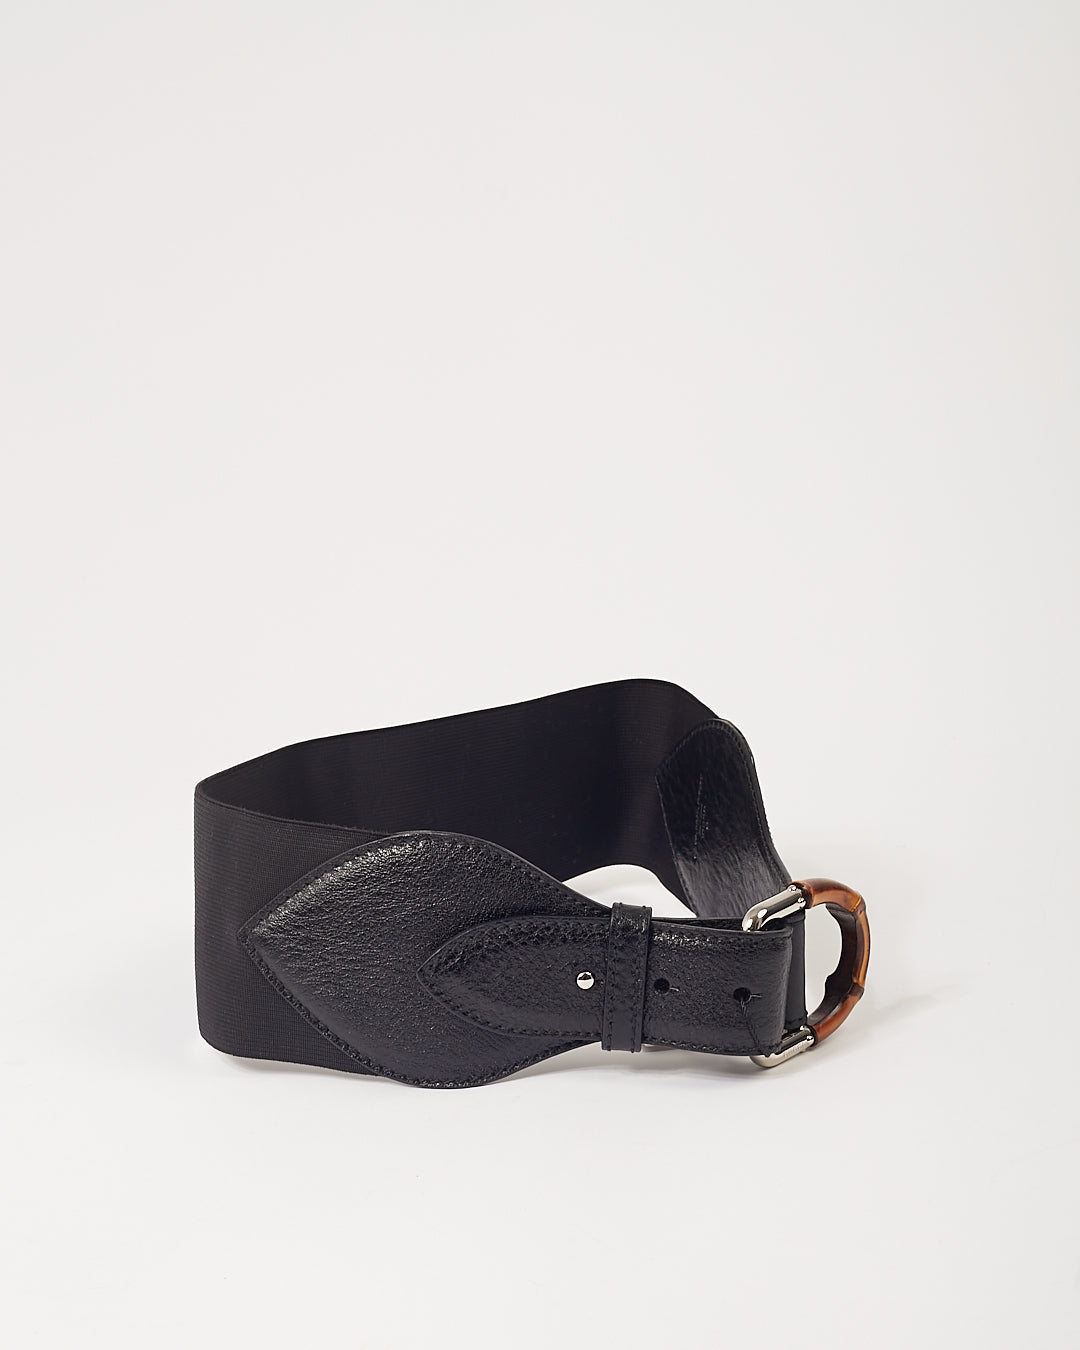 Gucci Black Leather Bamboo Buckle Belt - 65